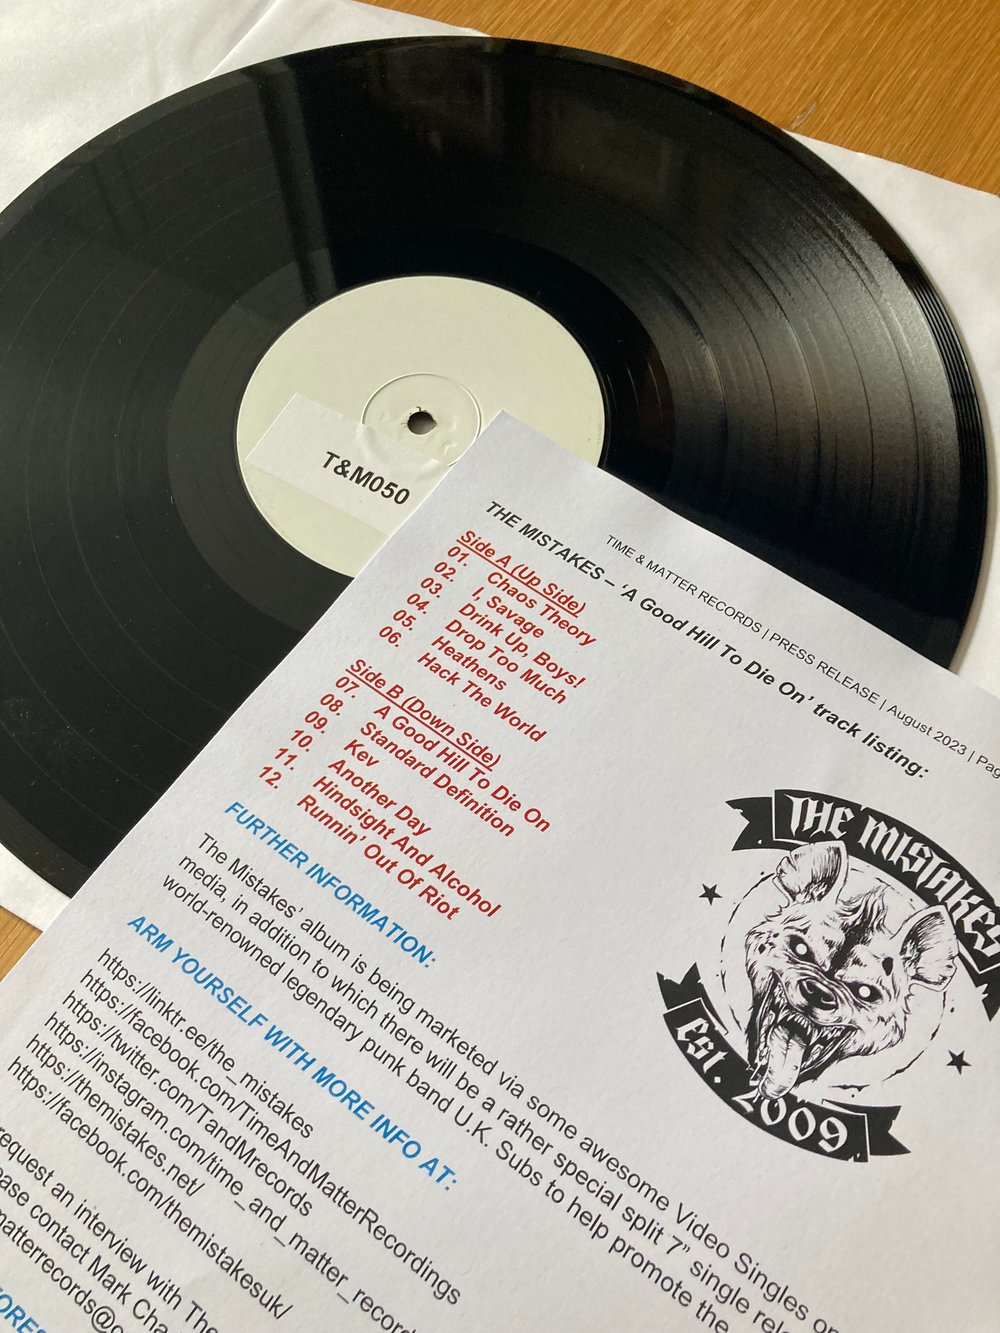 TEST PRESSING T&M 050 LP - The Mistakes - 'A Good Hill To Die On'